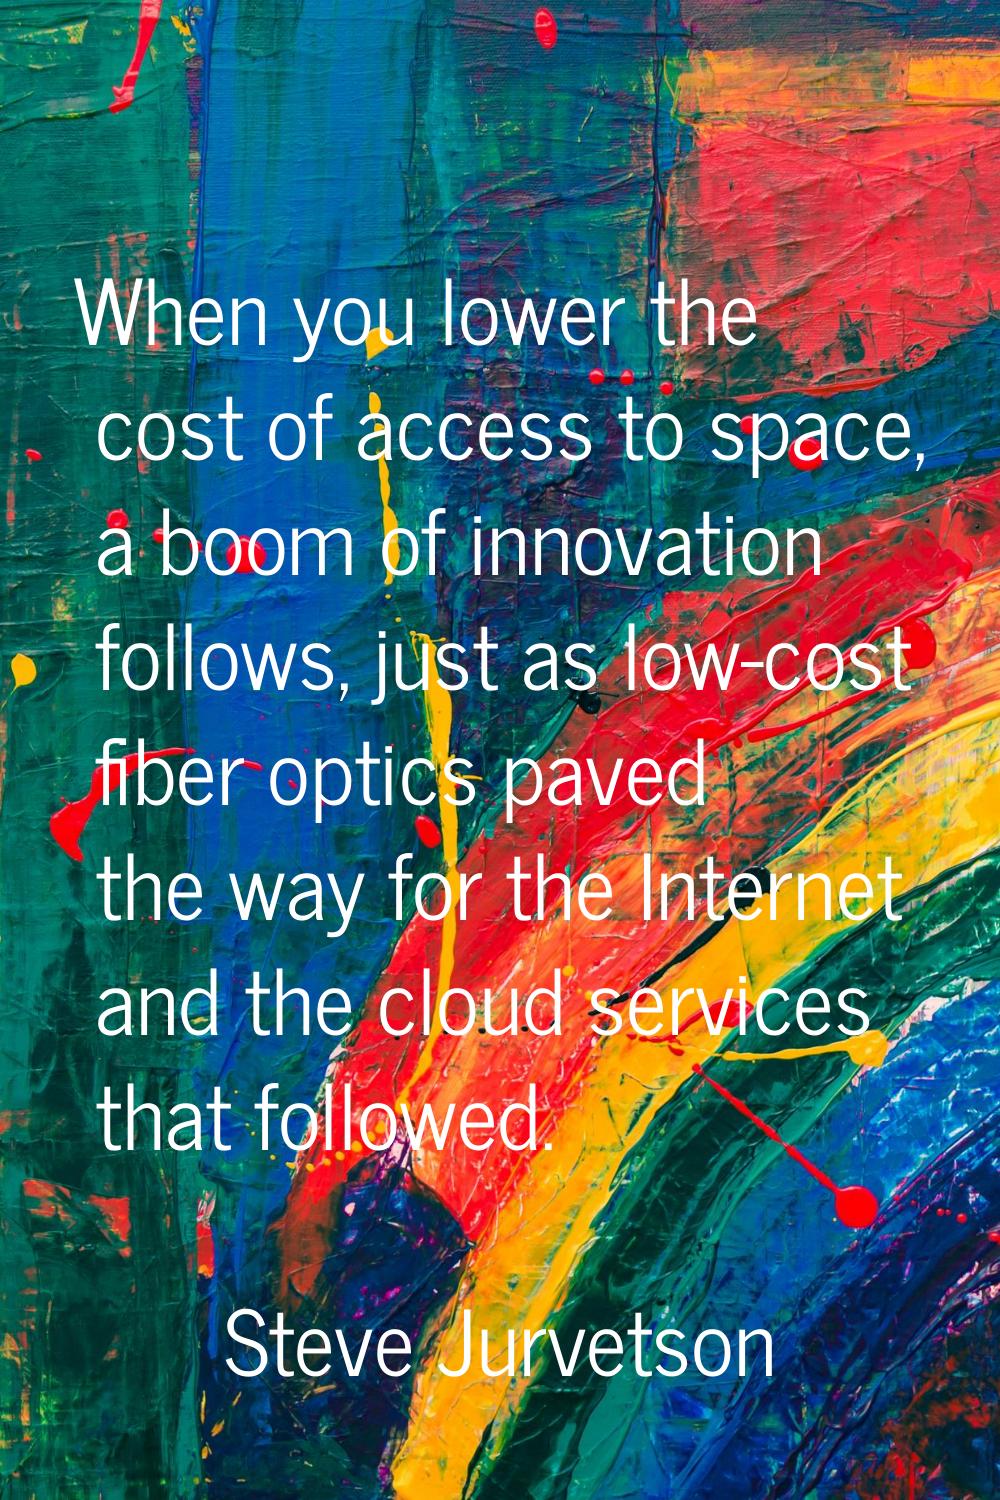 When you lower the cost of access to space, a boom of innovation follows, just as low-cost fiber op